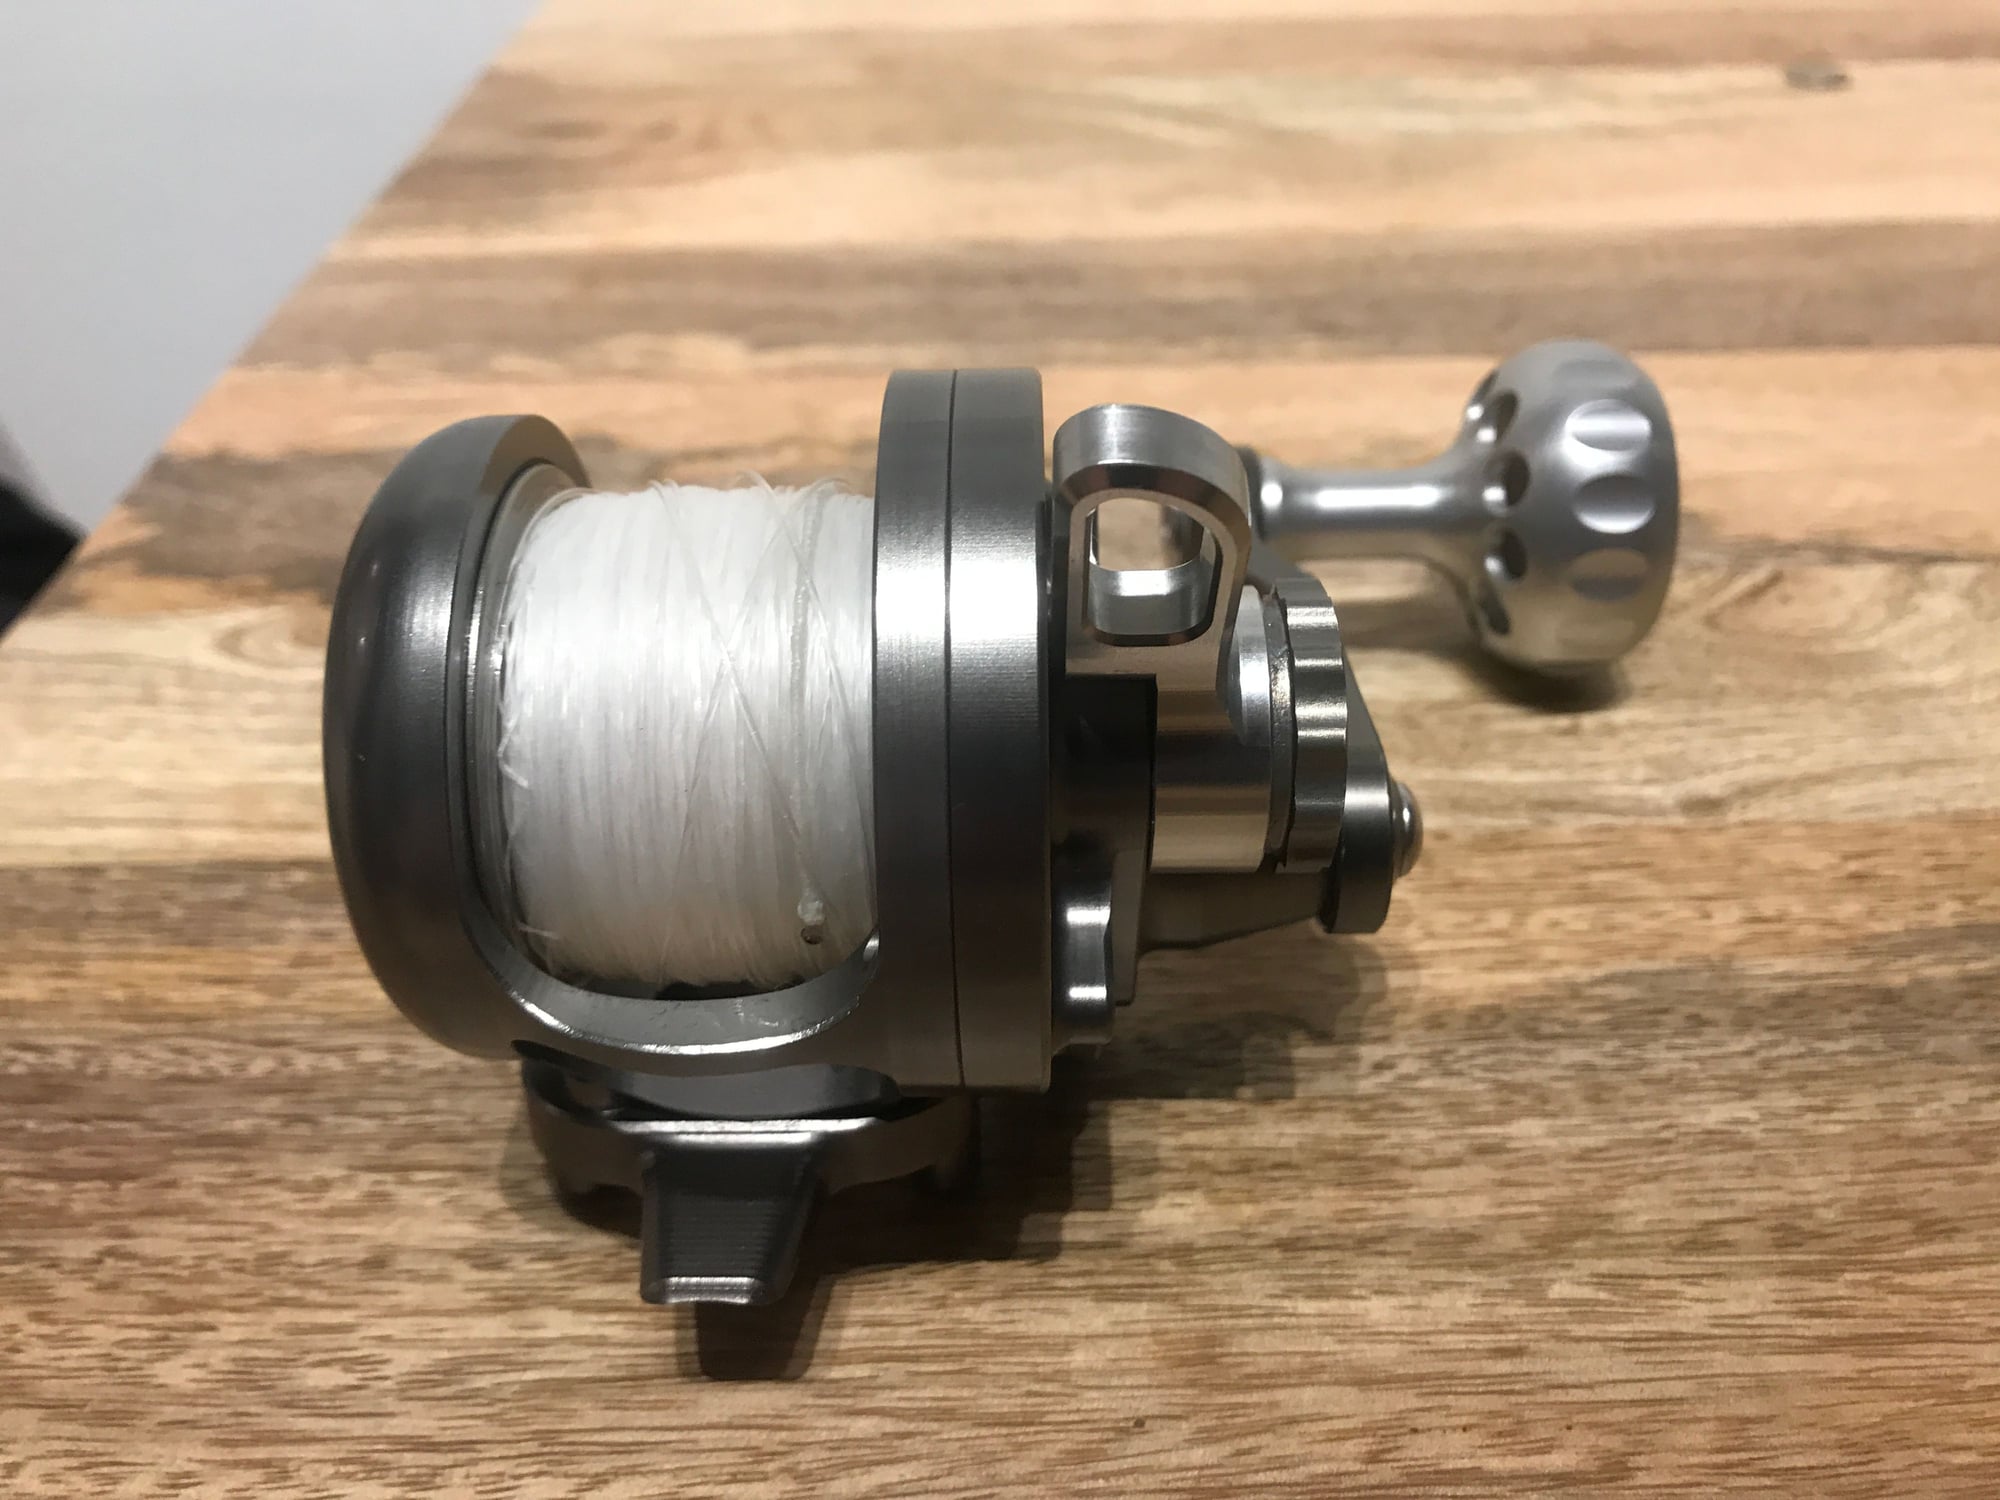 Release SG Lever Drag Reel $200 - The Hull Truth - Boating and